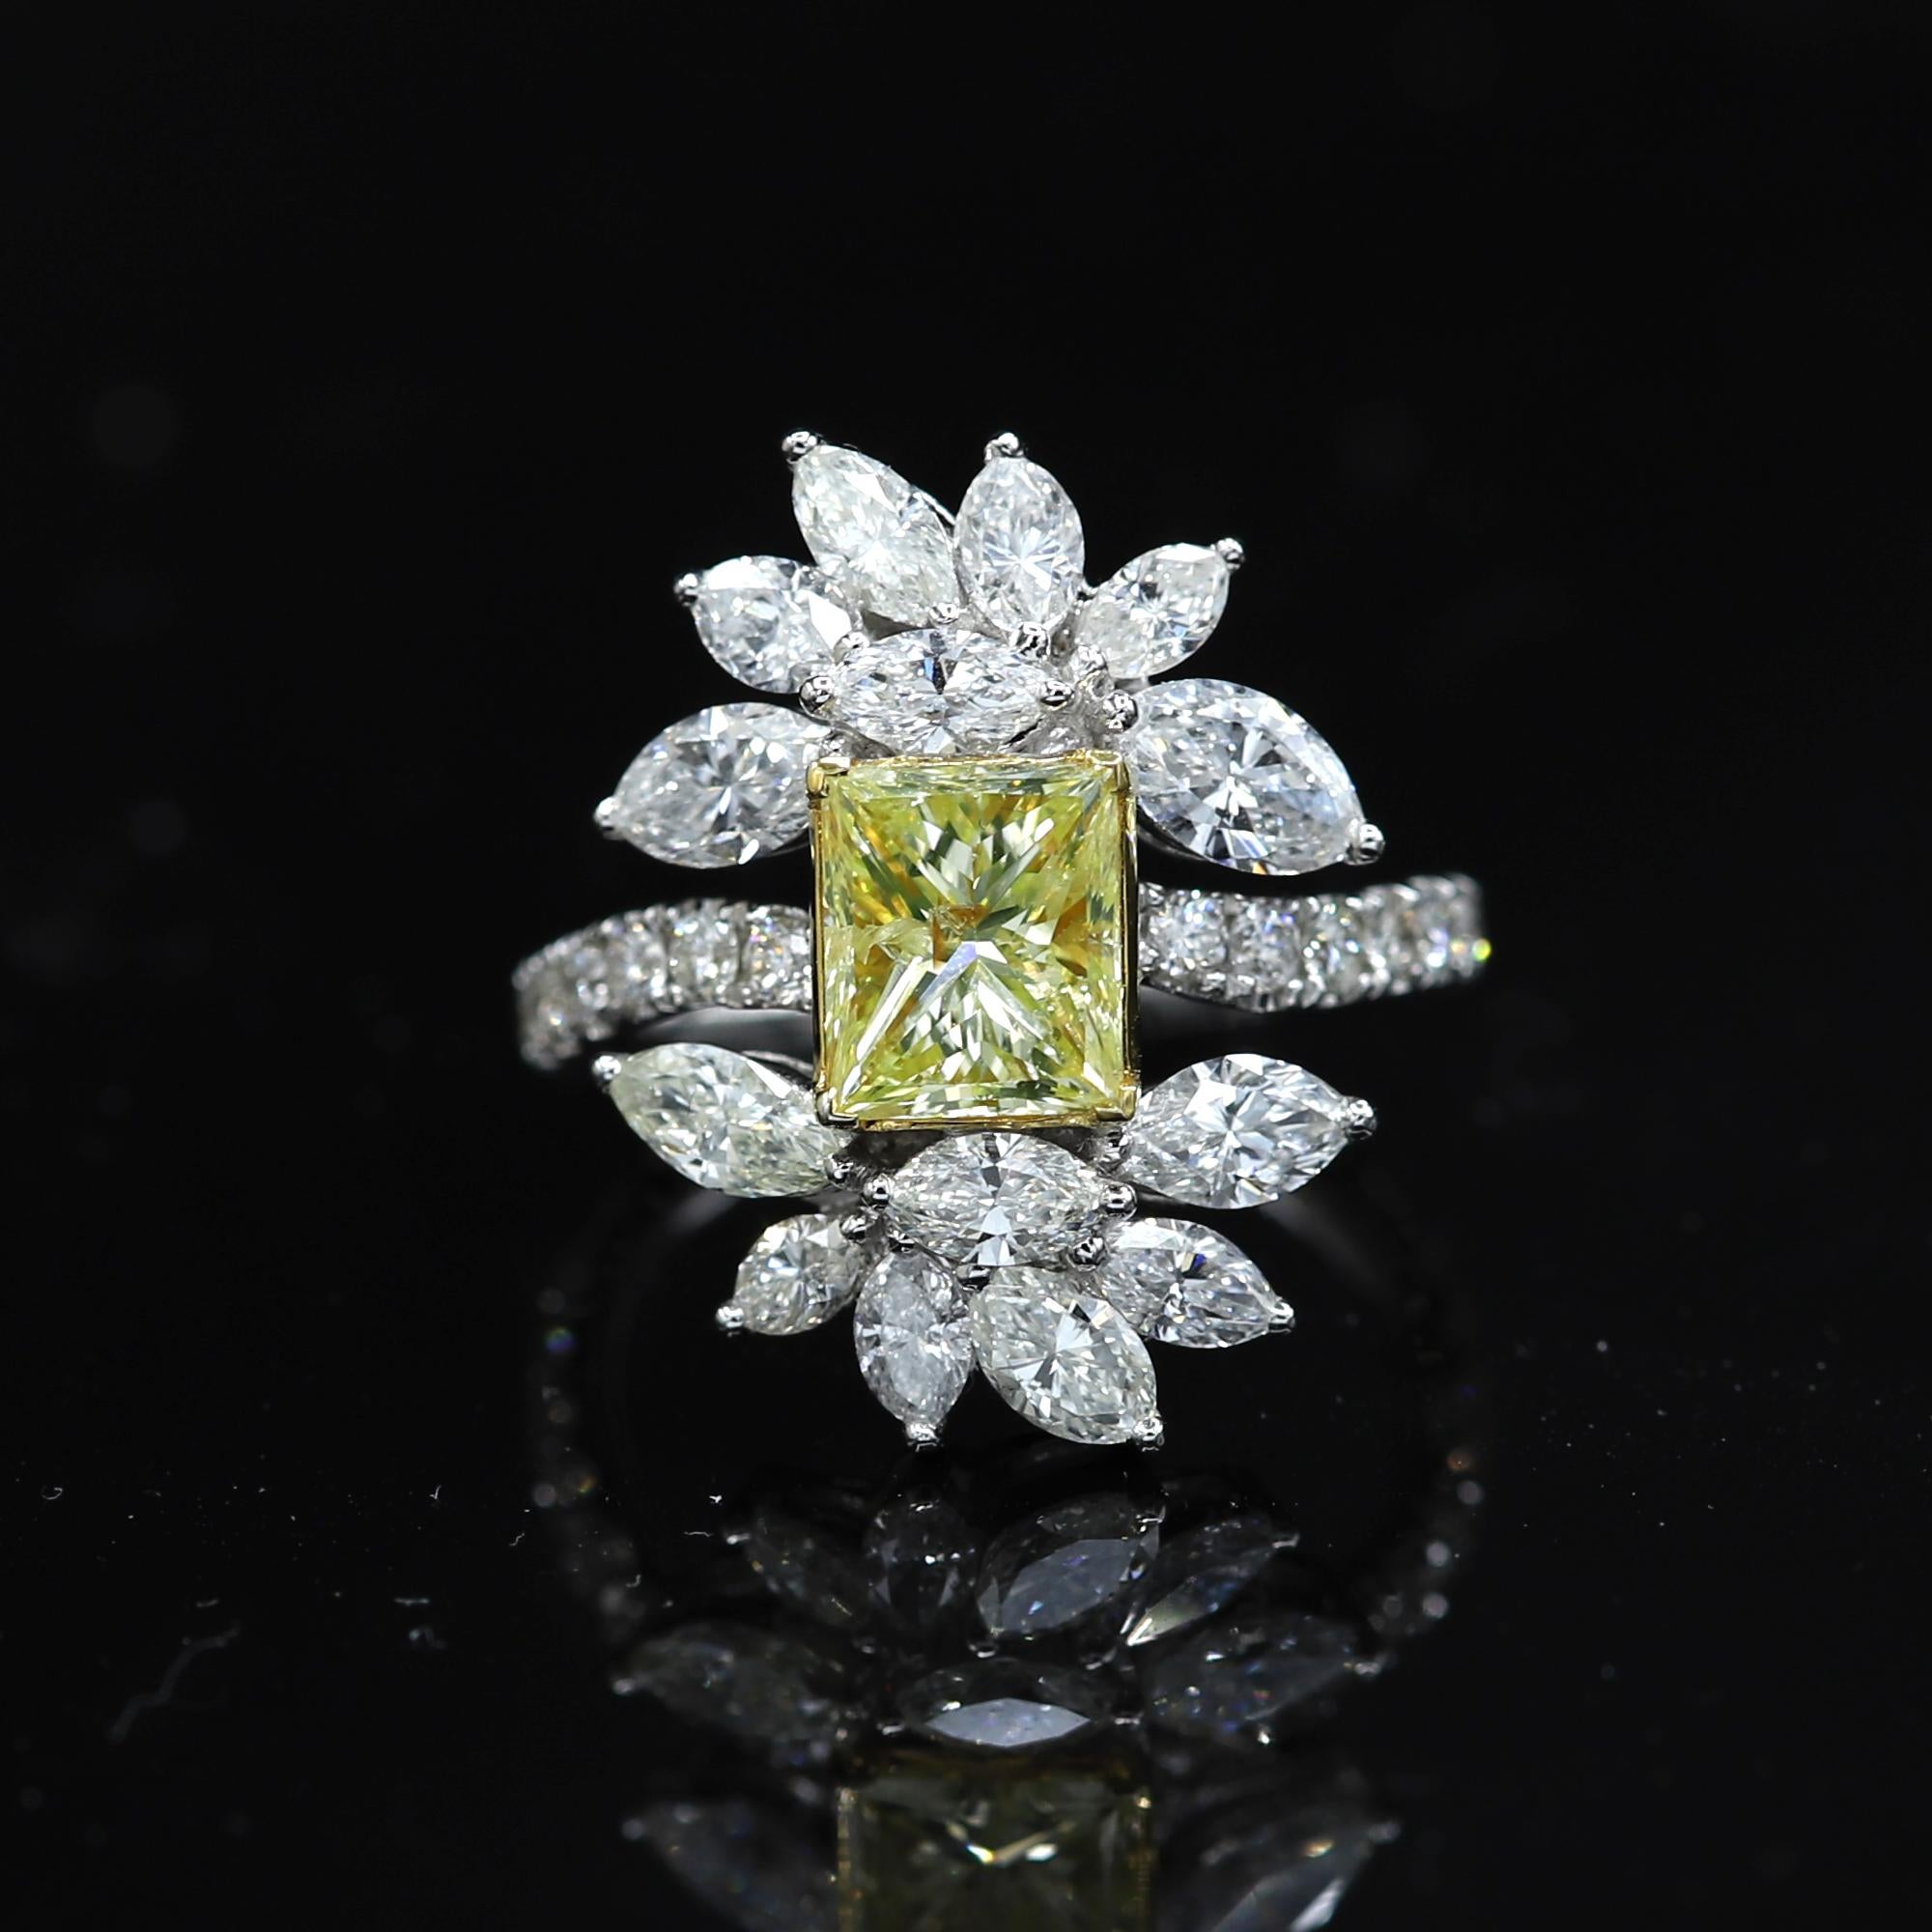 Unique and Brilliant Design and artistic craftsman, Statement Ring. Yellow & White Diamonds- all natural stones.
18k White Gold 8.0 grams, Center Stone is Natural Light Yellow - I1-I2, 1.91 carat.  All other Diamonds (marquise & small round) total